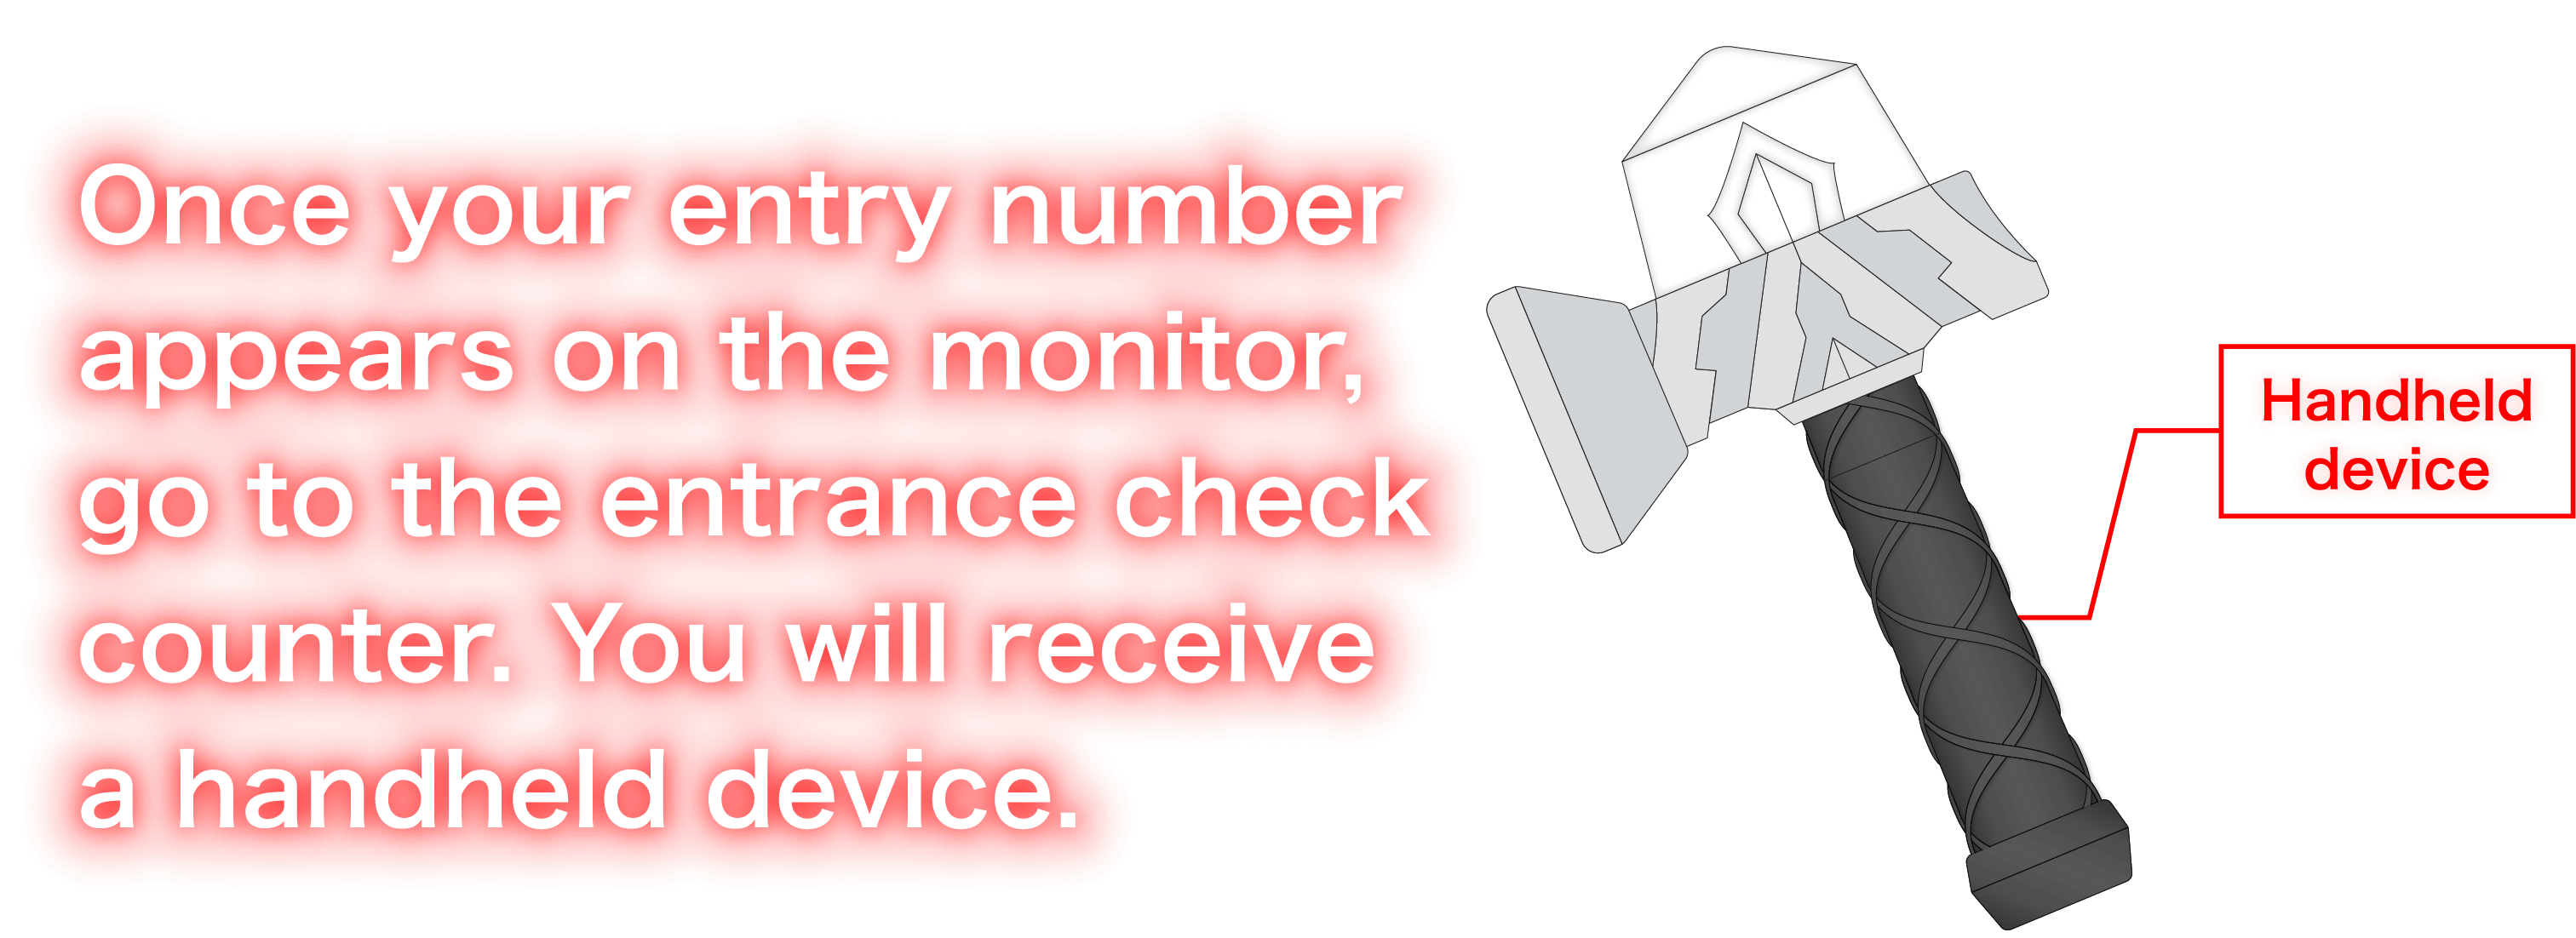 Once your entry number appears on the monitor, go to the entrance check counter. You will receive a handheld device.